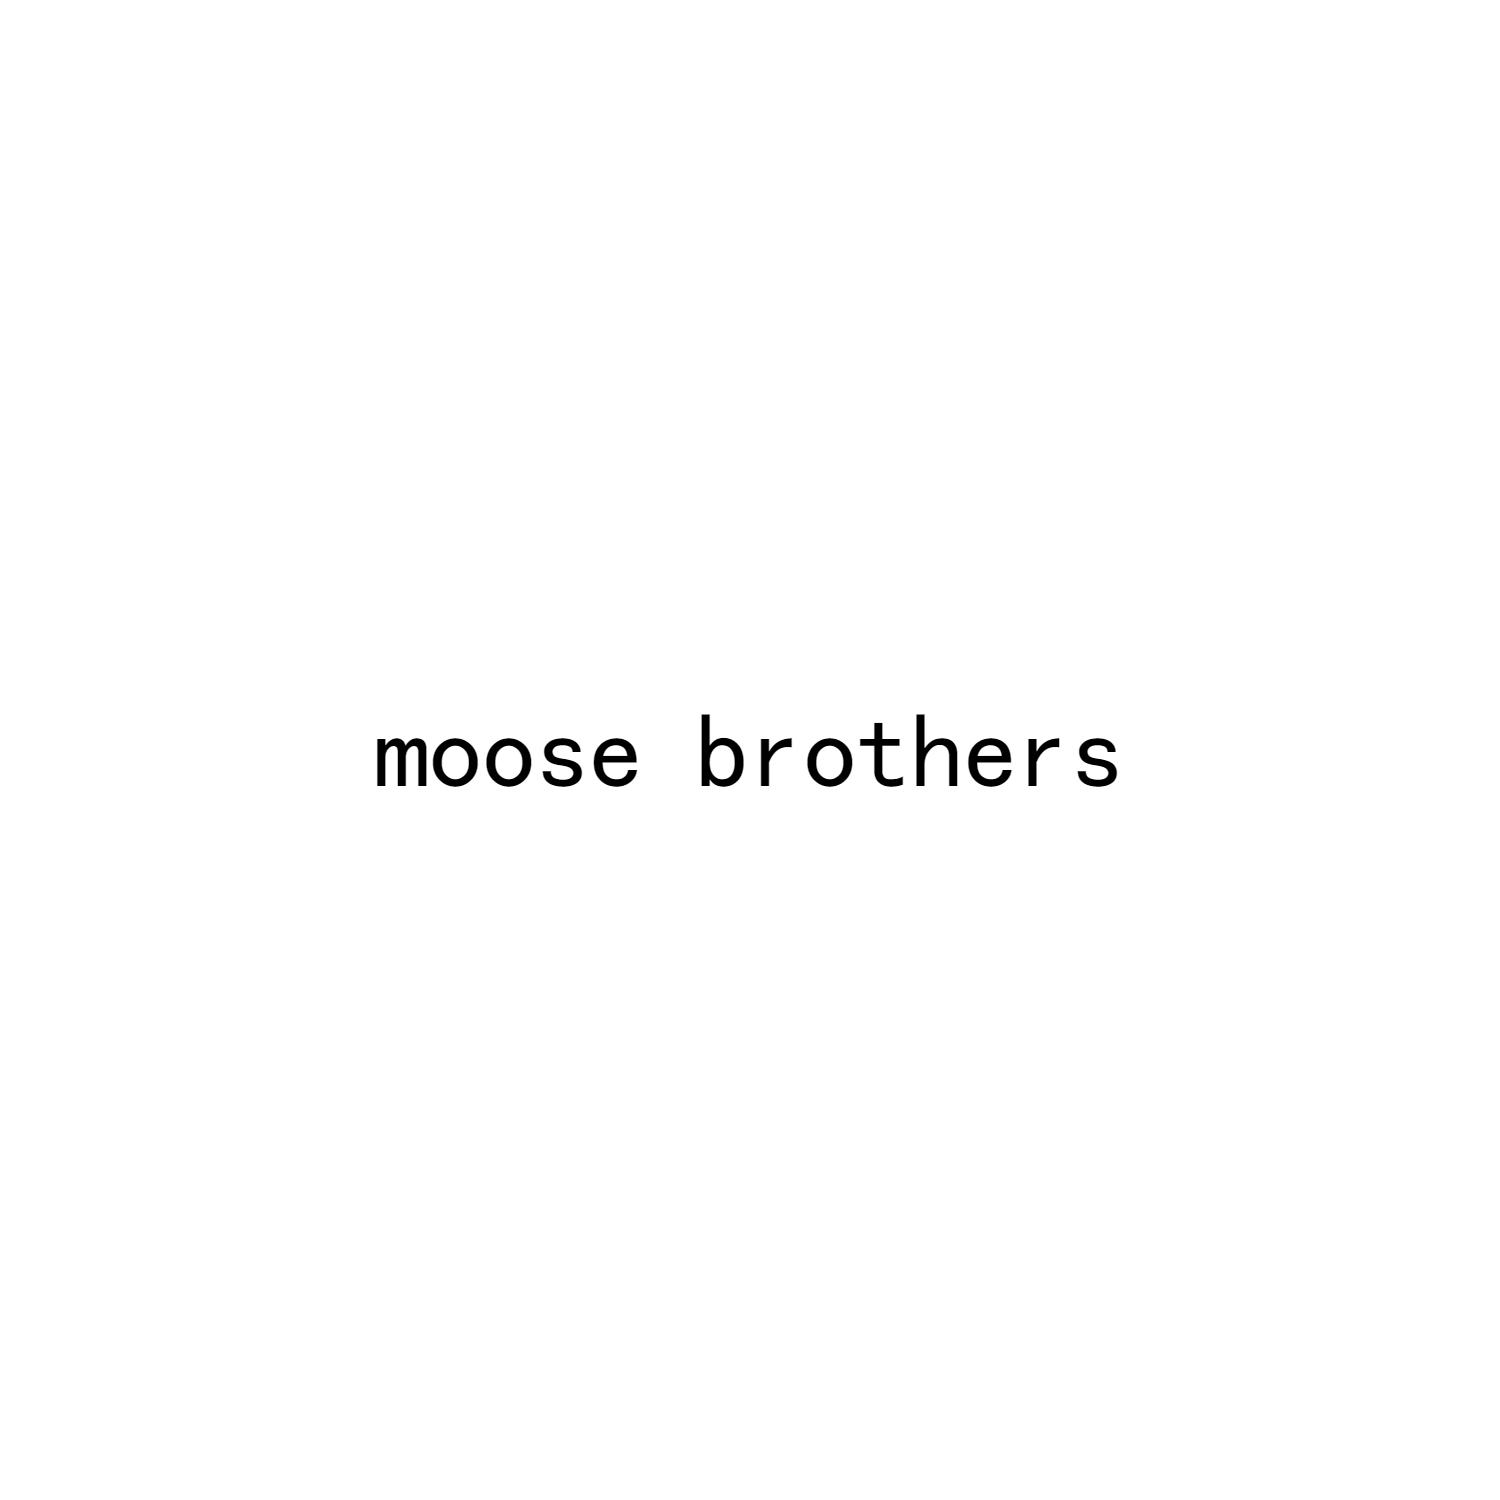 MOOSE BROTHERS